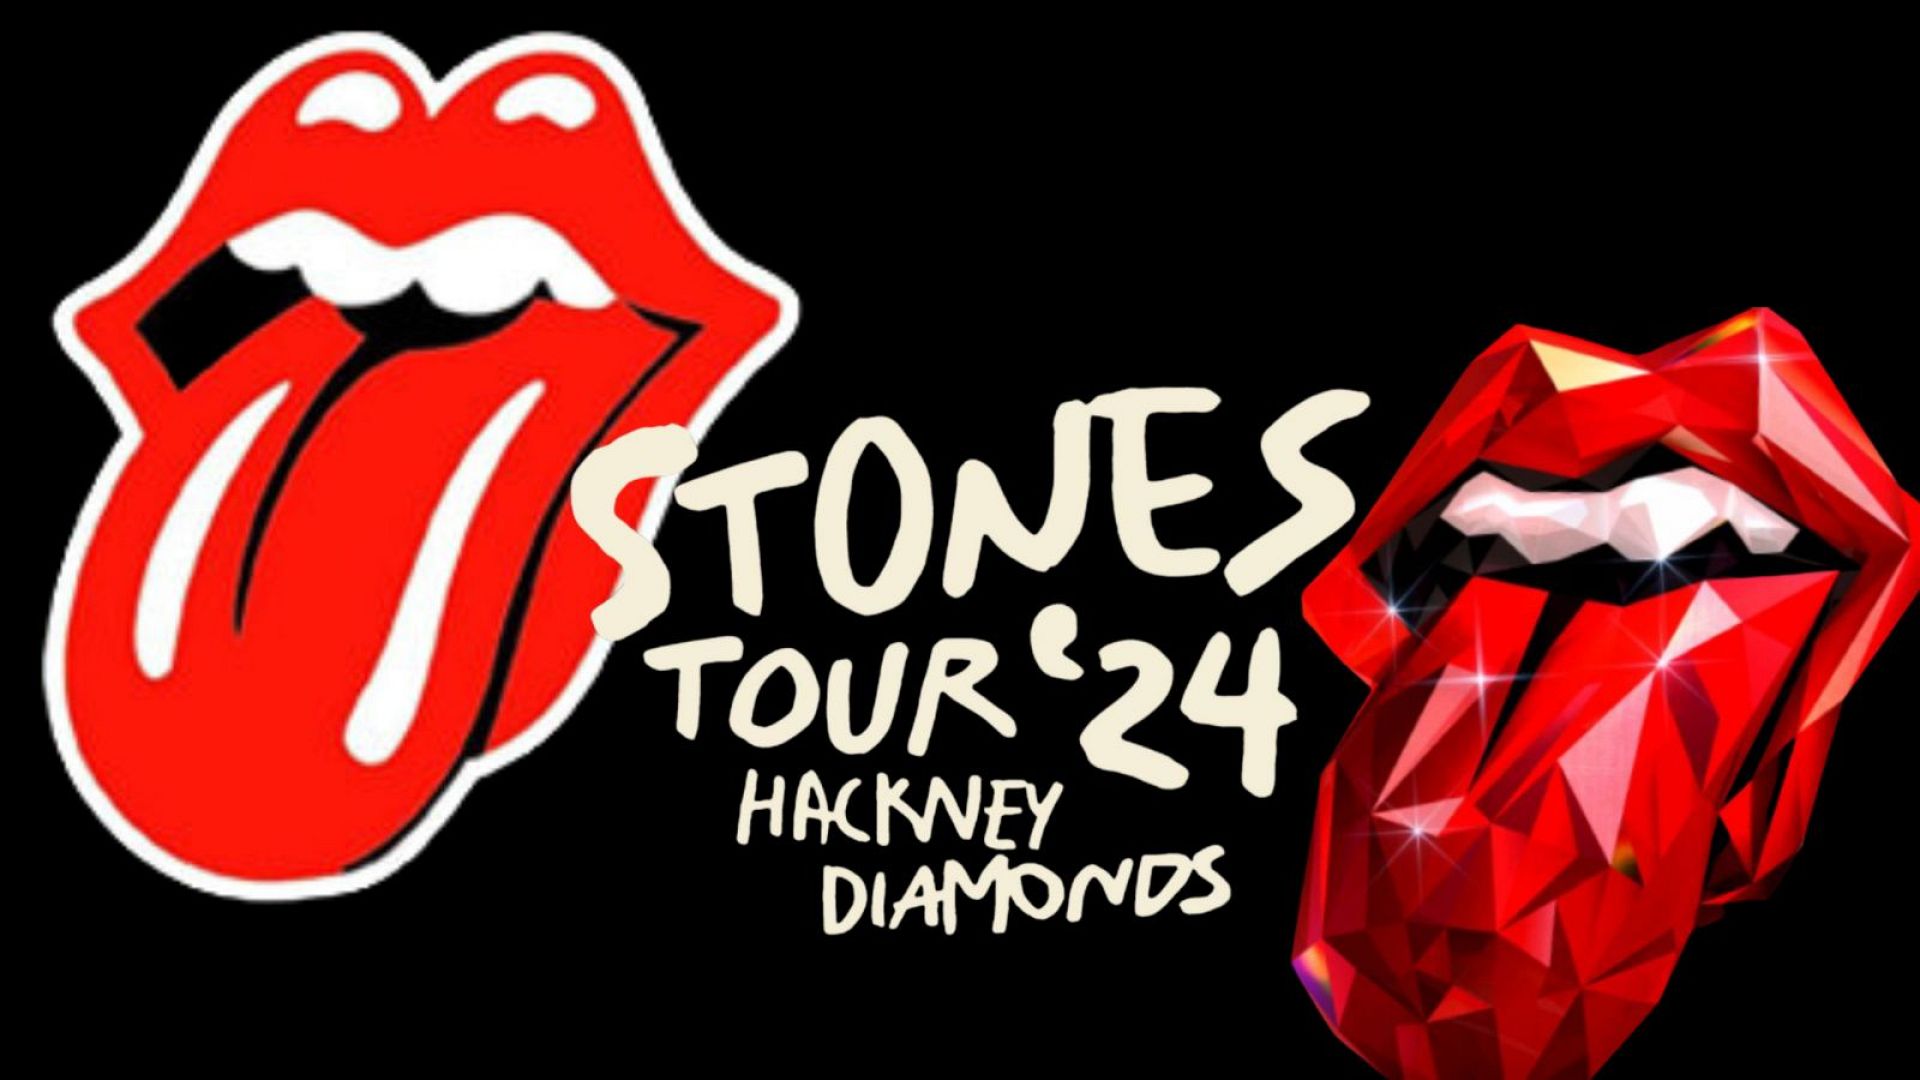 The Rolling Stones announce 2024 tour But what's behind that tongue